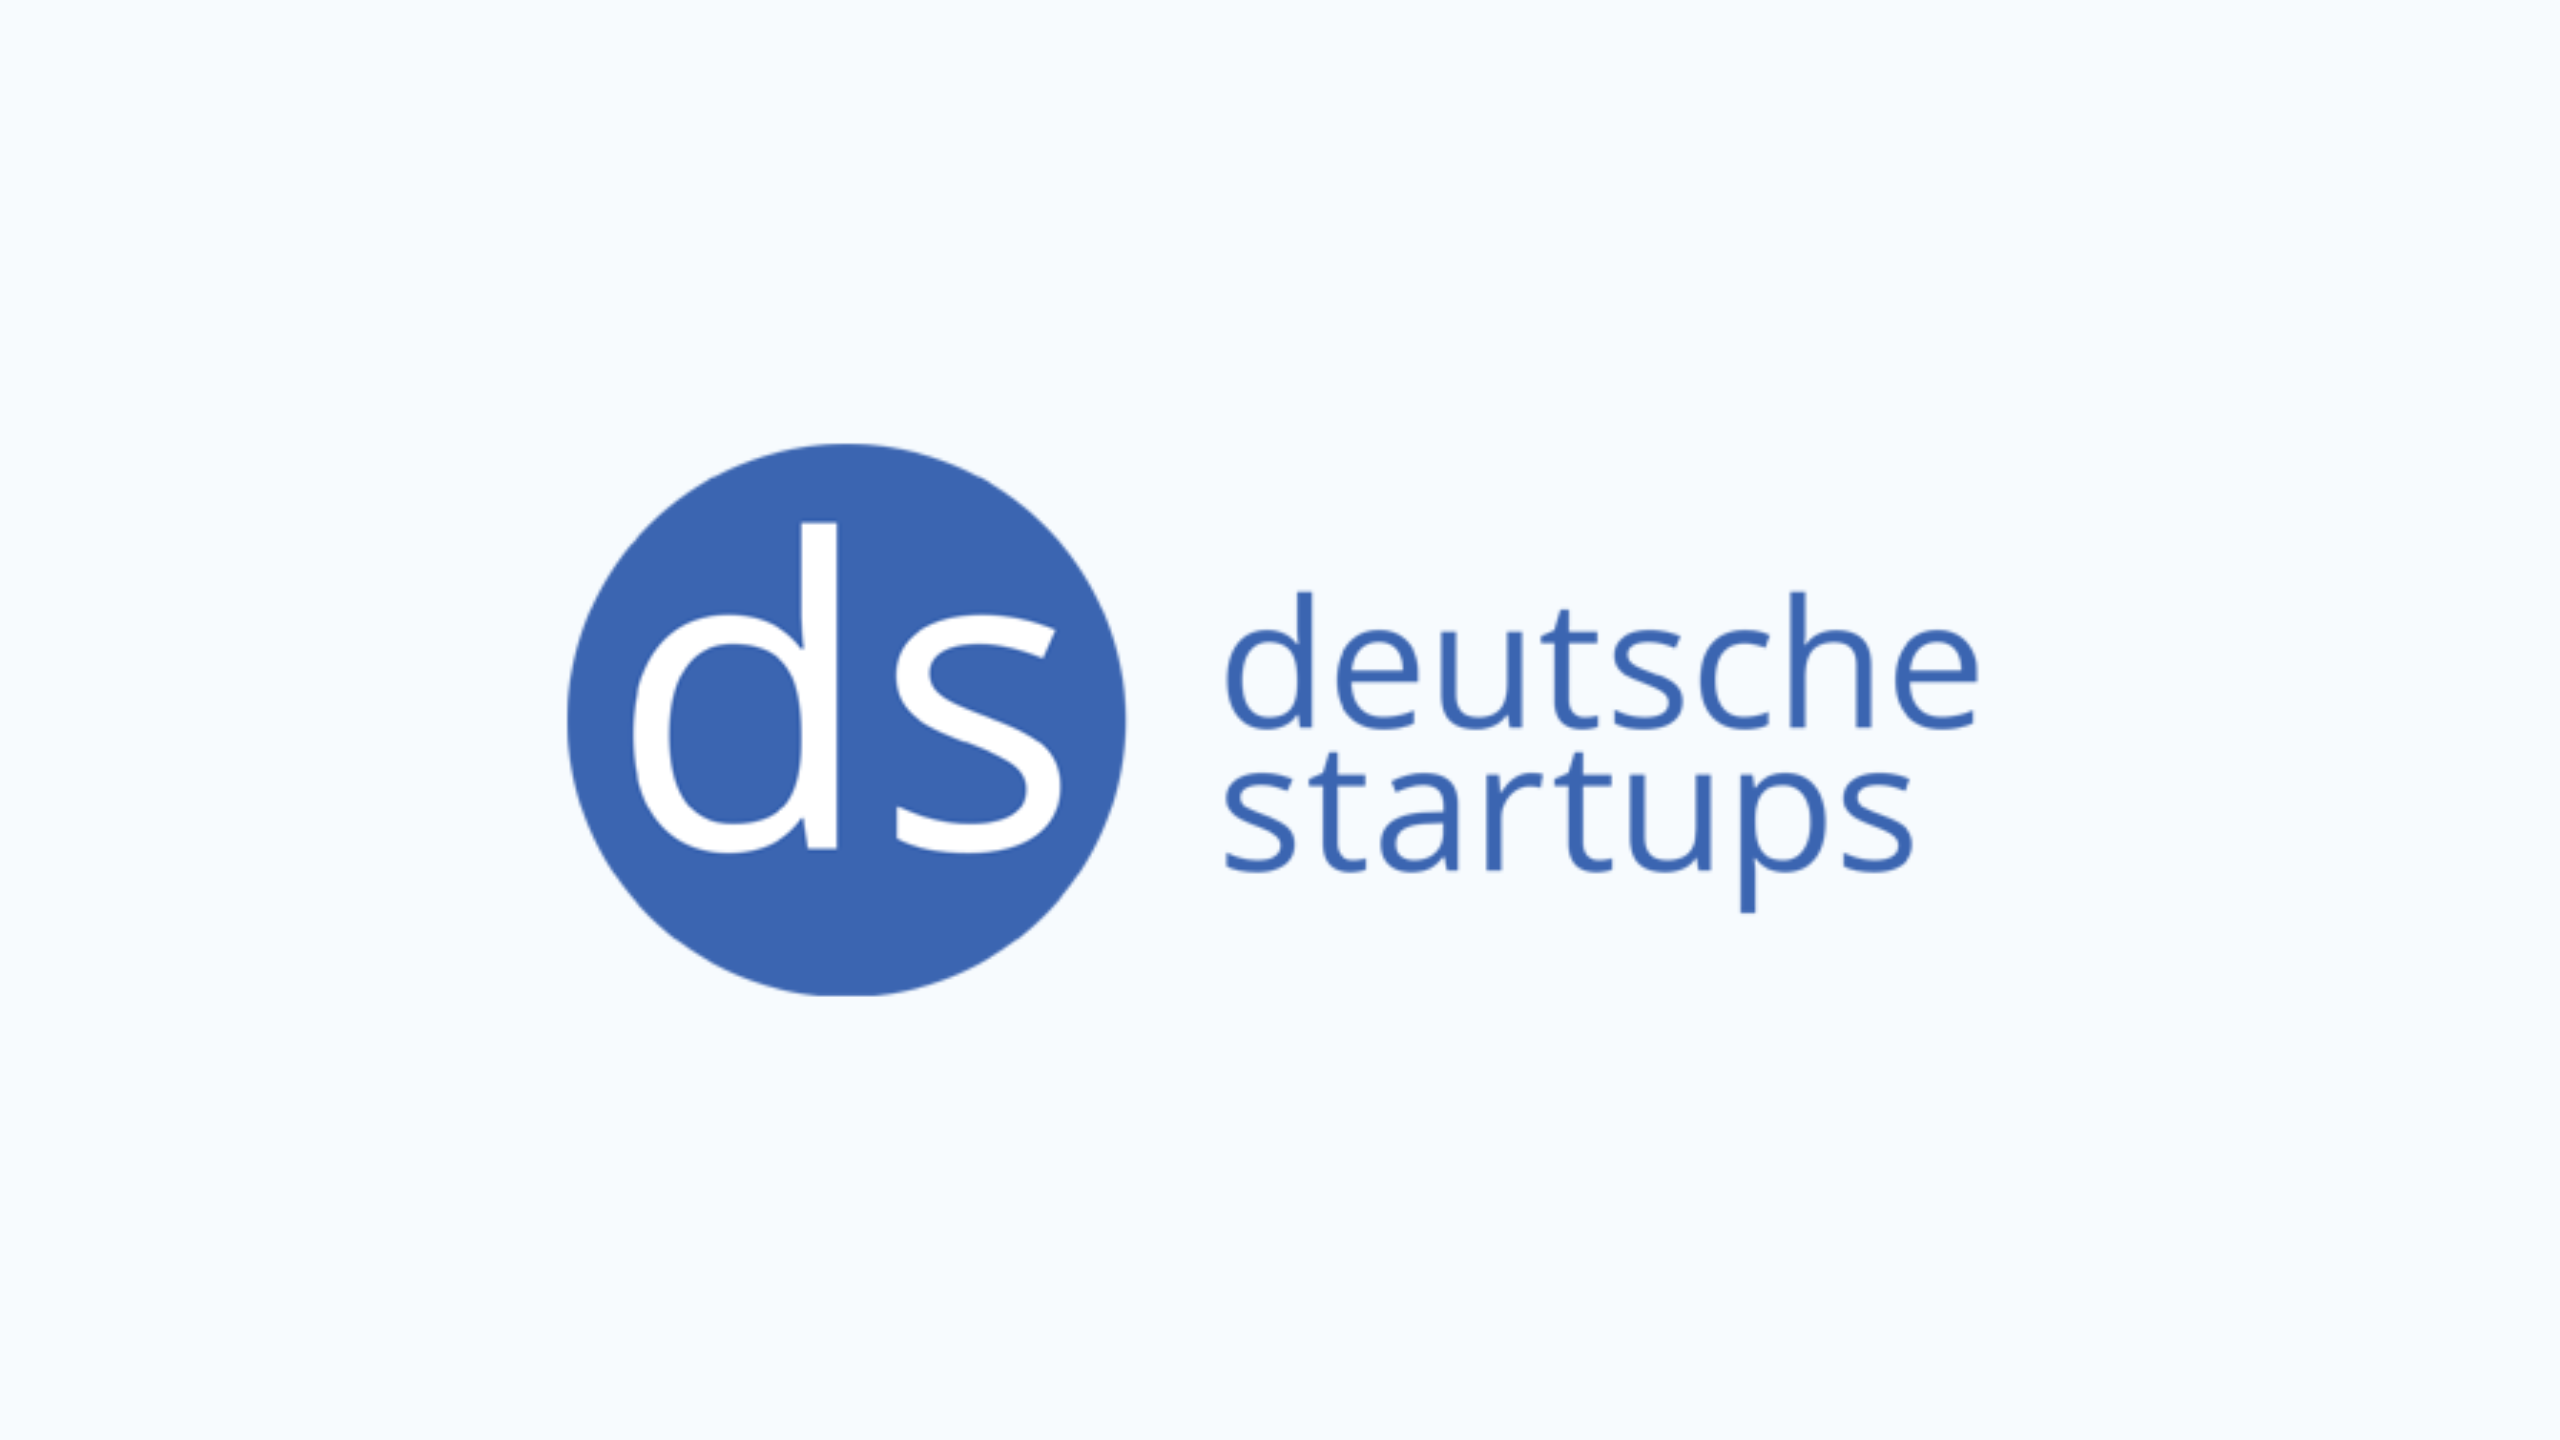 18 up-and-coming start-ups from Stuttgart that everyone should know about